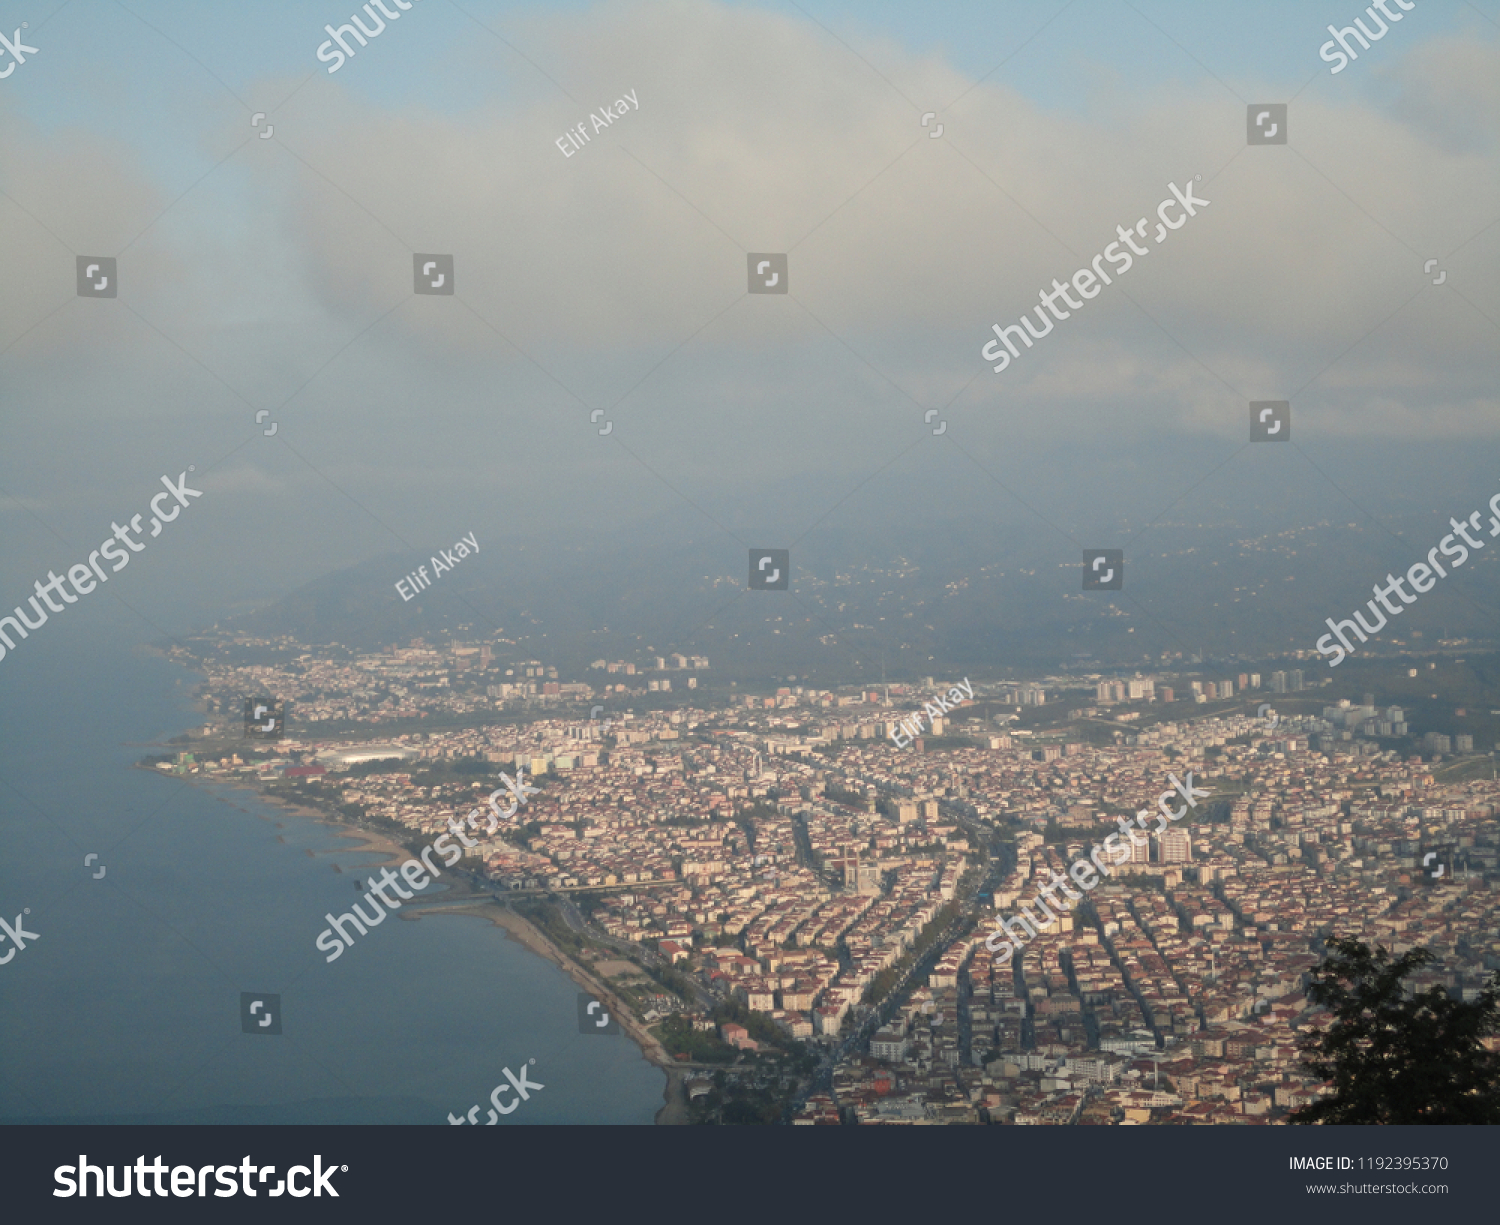 General view of the Ordu from Boz Hill (Gray Hill). Boz Hill (Gray Hill), Ordu, Turkey. #1192395370